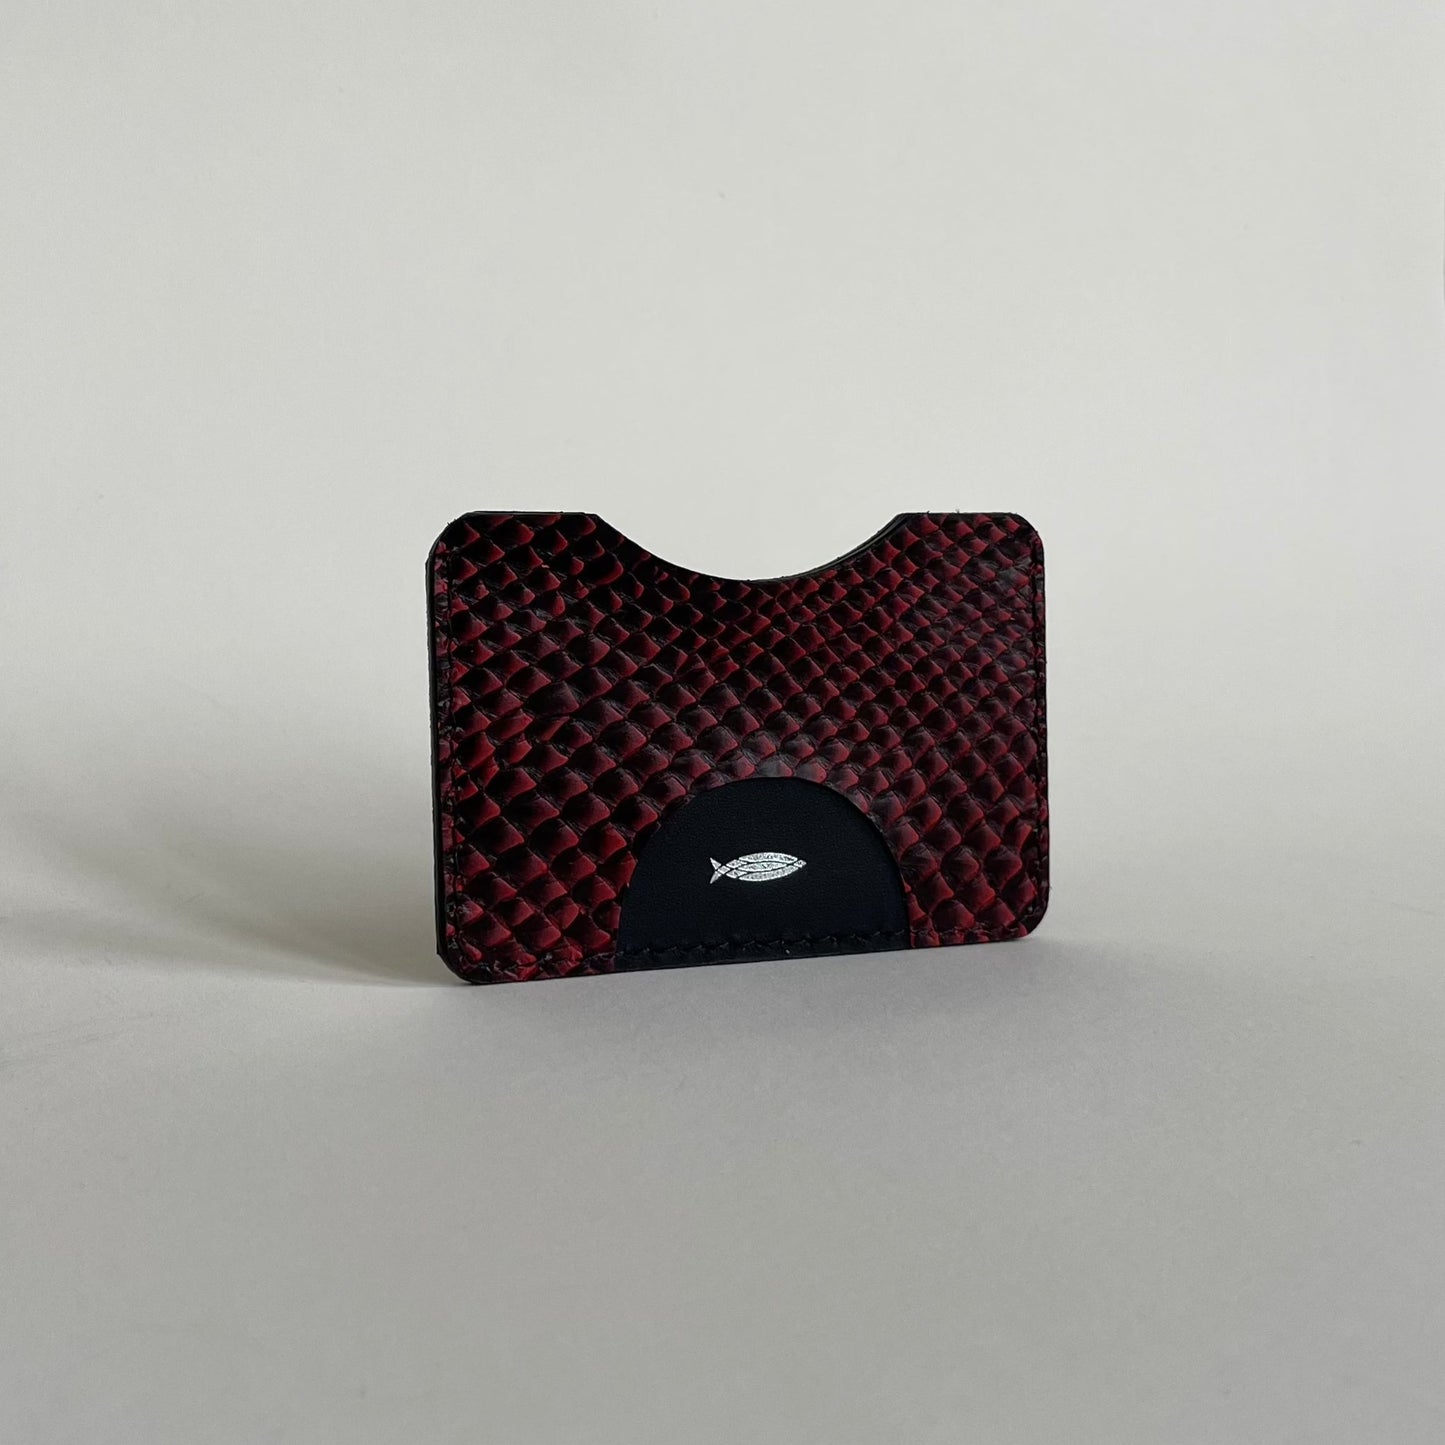 Fish leather cardholder, flame